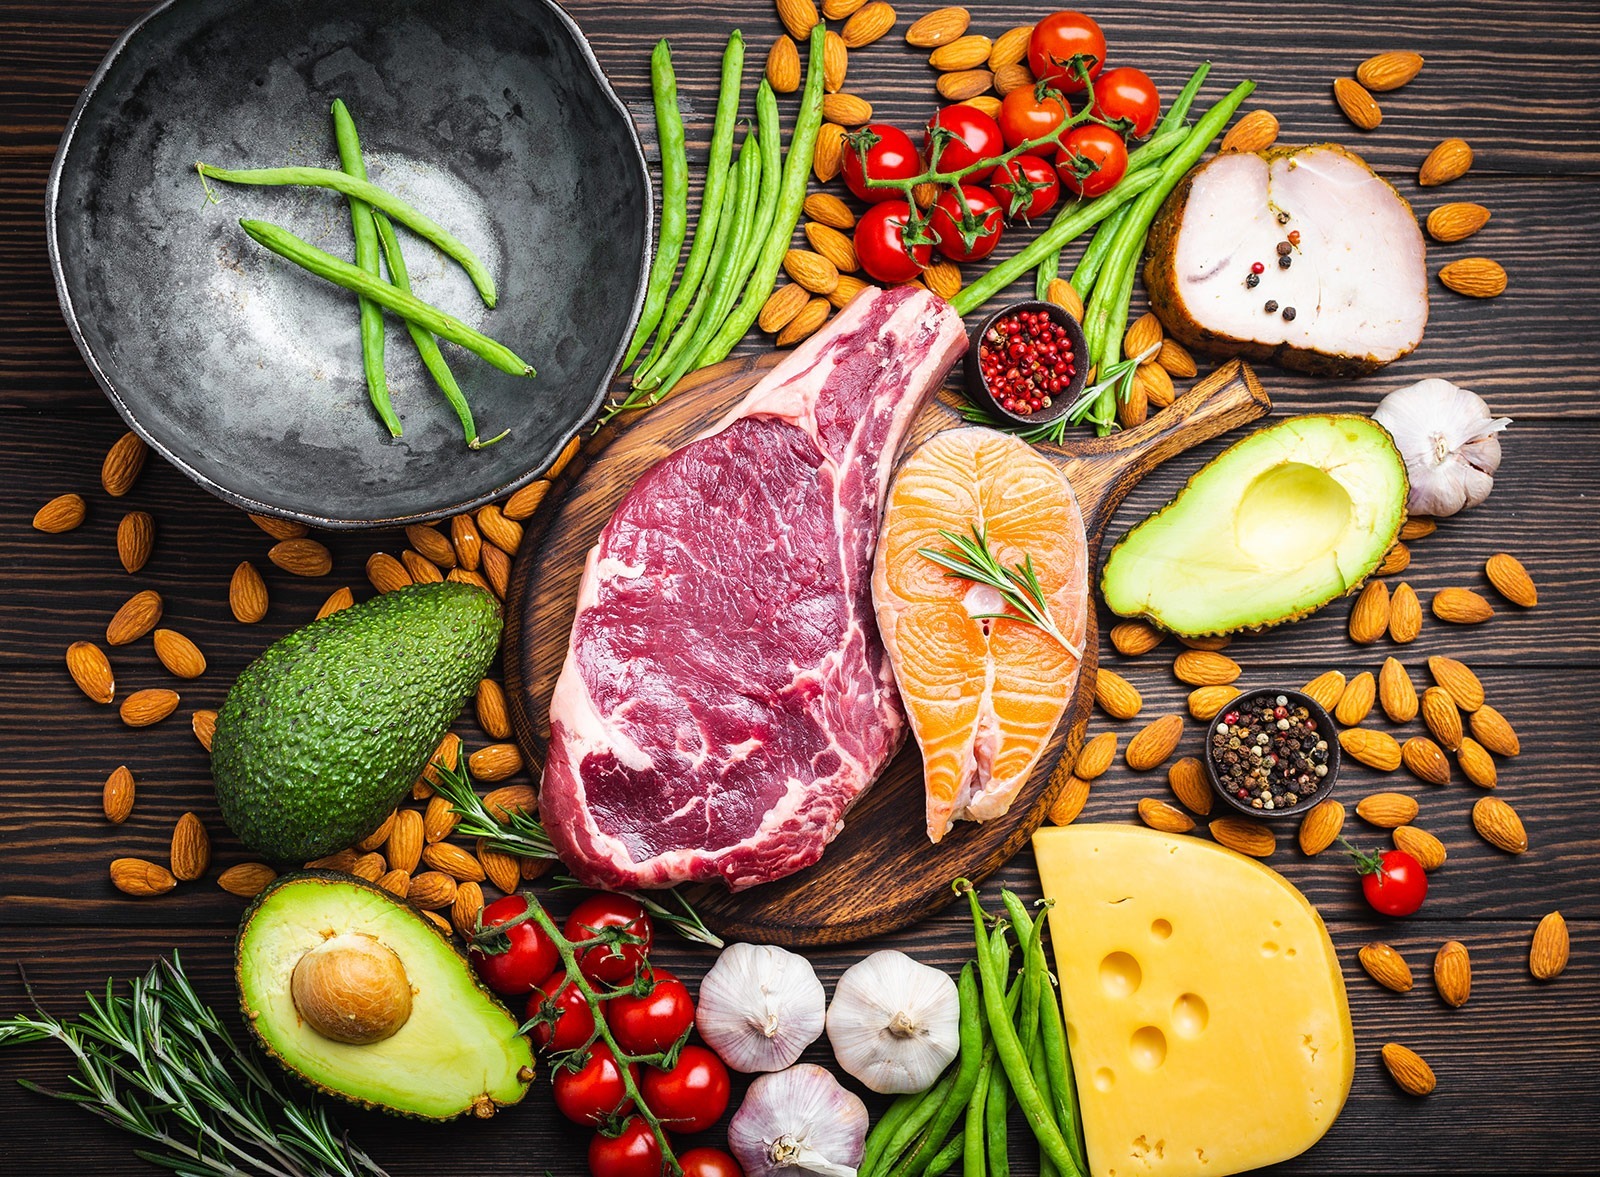 Keto is a popular diet that has gained a lot of attention in recent